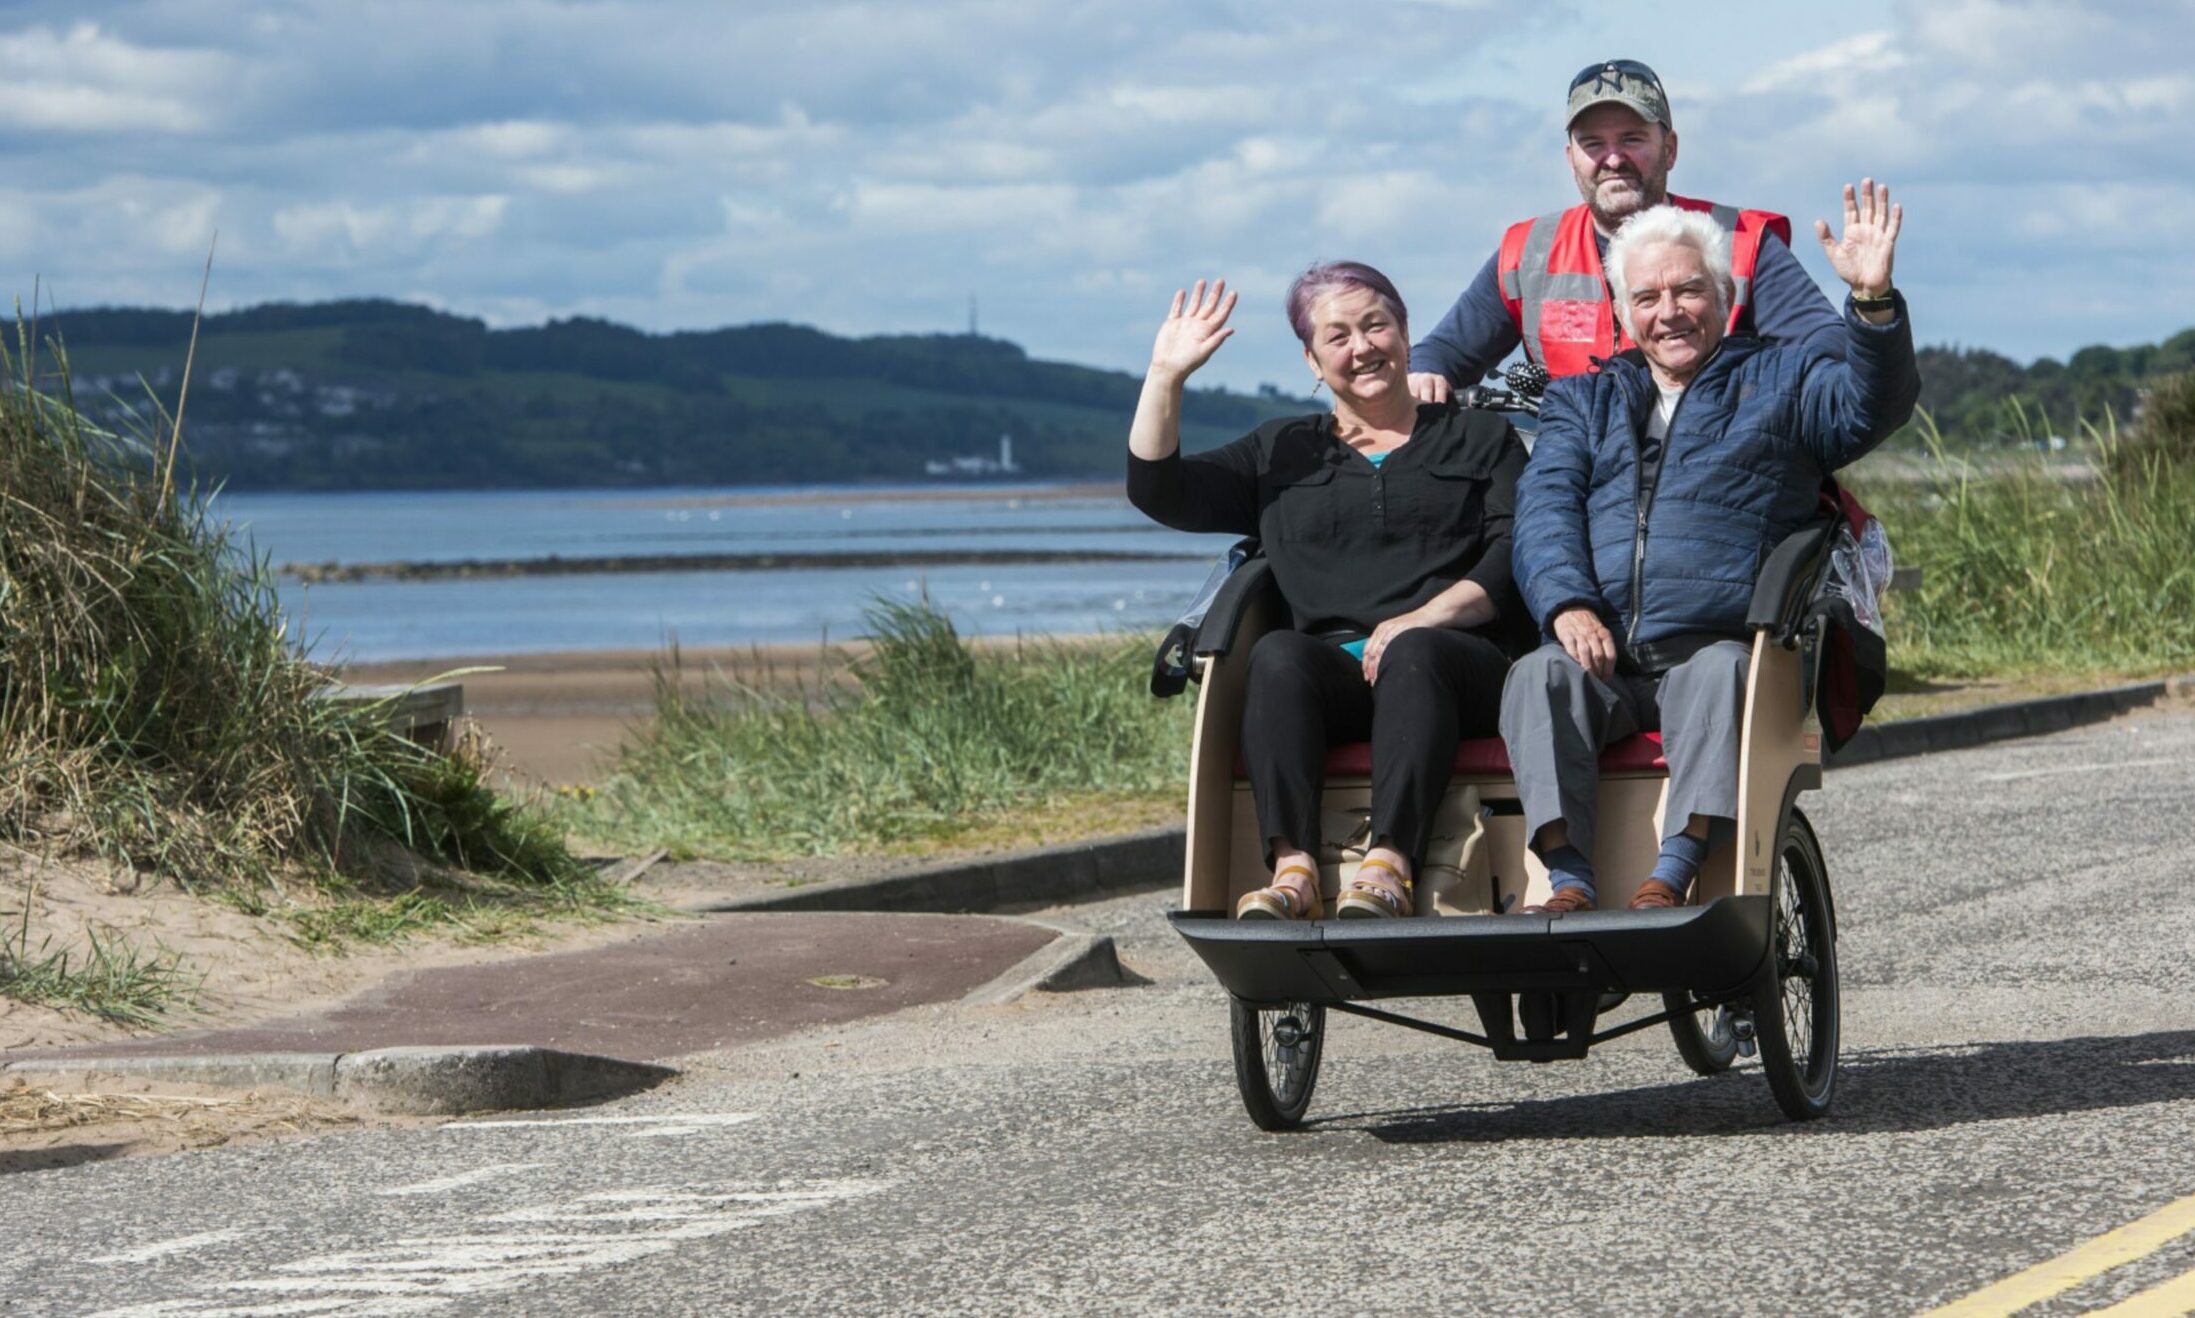 Volunteer pilot Richard Rooney takes Councillor Beth Whiteside and visitor Adam Harper for a spin on the Monifieth group's official launch day. Photo: Alan Richardson / Pix-AR.co.uk